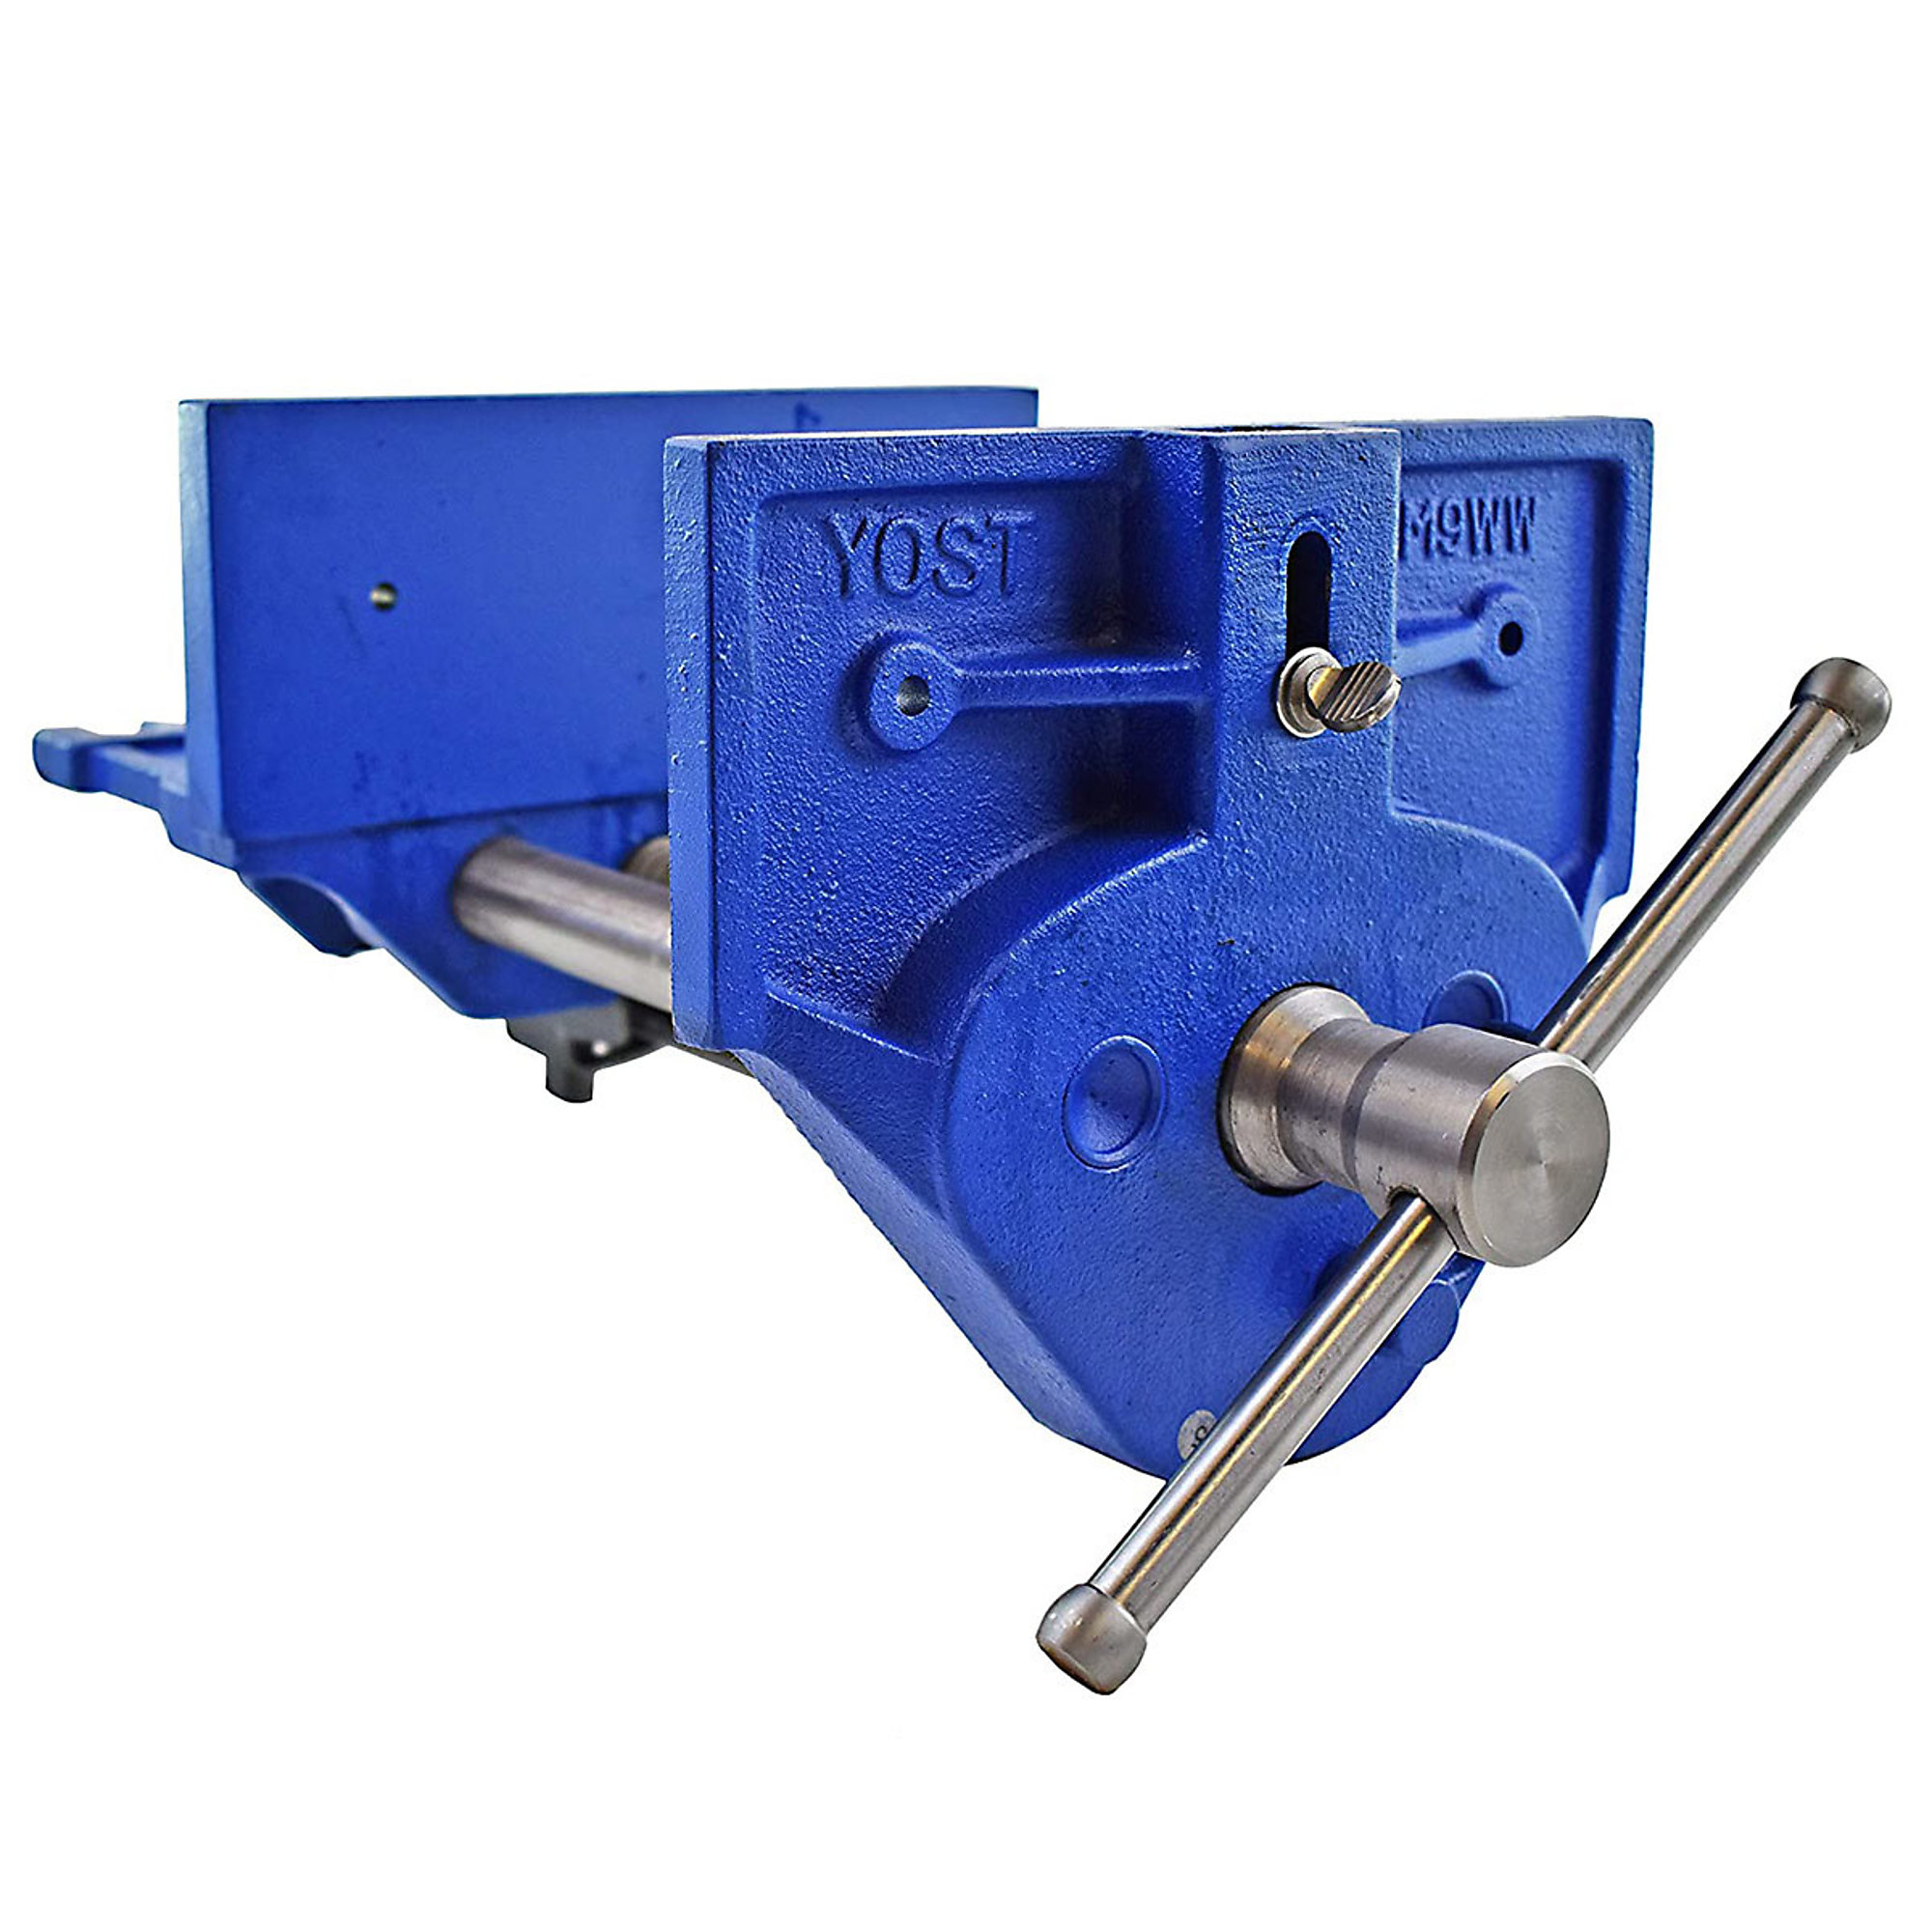 Yost Vises, 9Inch Woodworking Vise, Jaw Width 9 in, Jaw Capacity 10.25 in, Material Cast Iron, Model M9WW -  56483